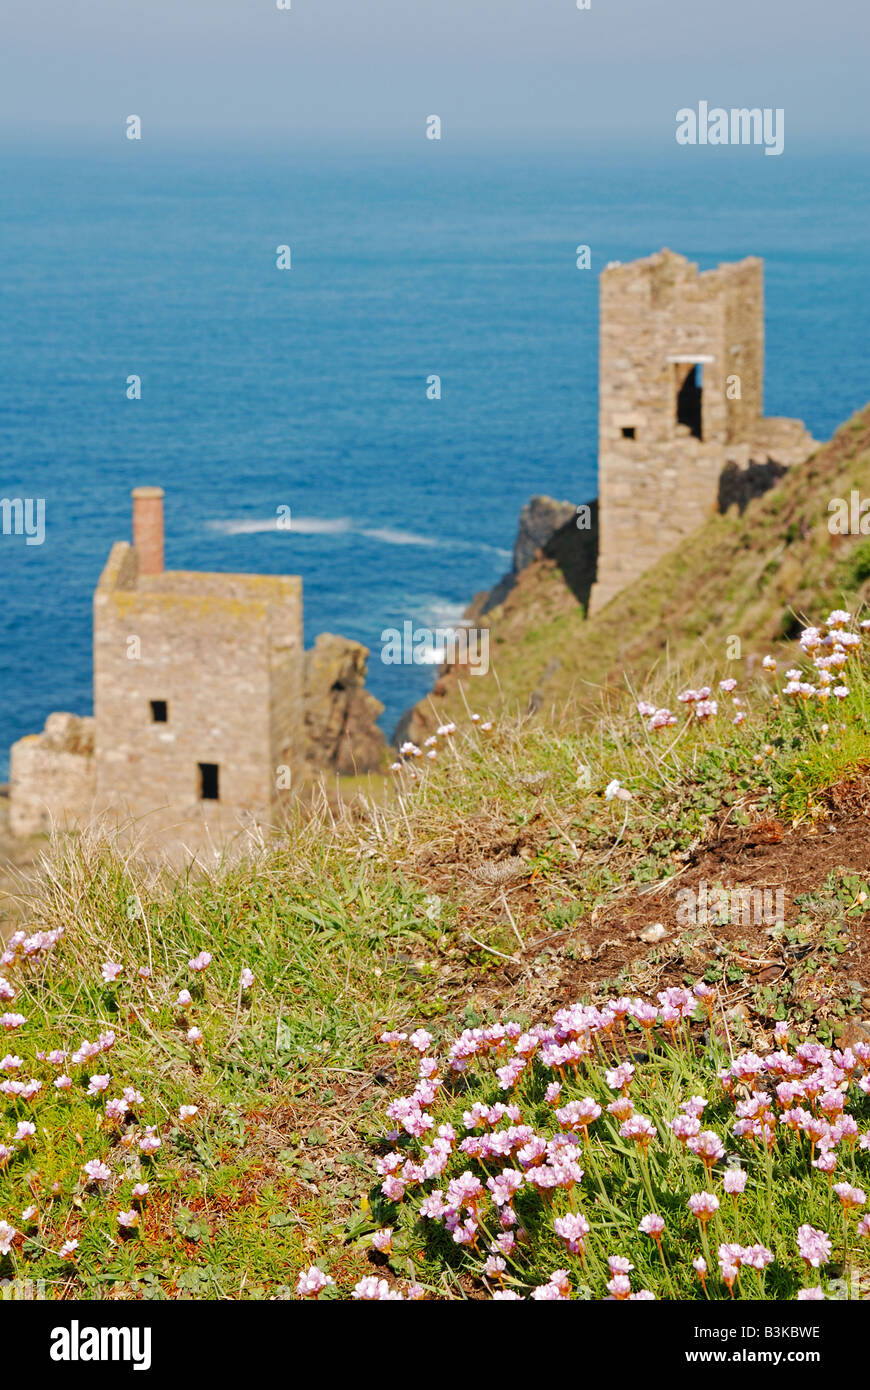 the botallack crowns engine houses on the coastline in penwith,cornwall,uk Stock Photo